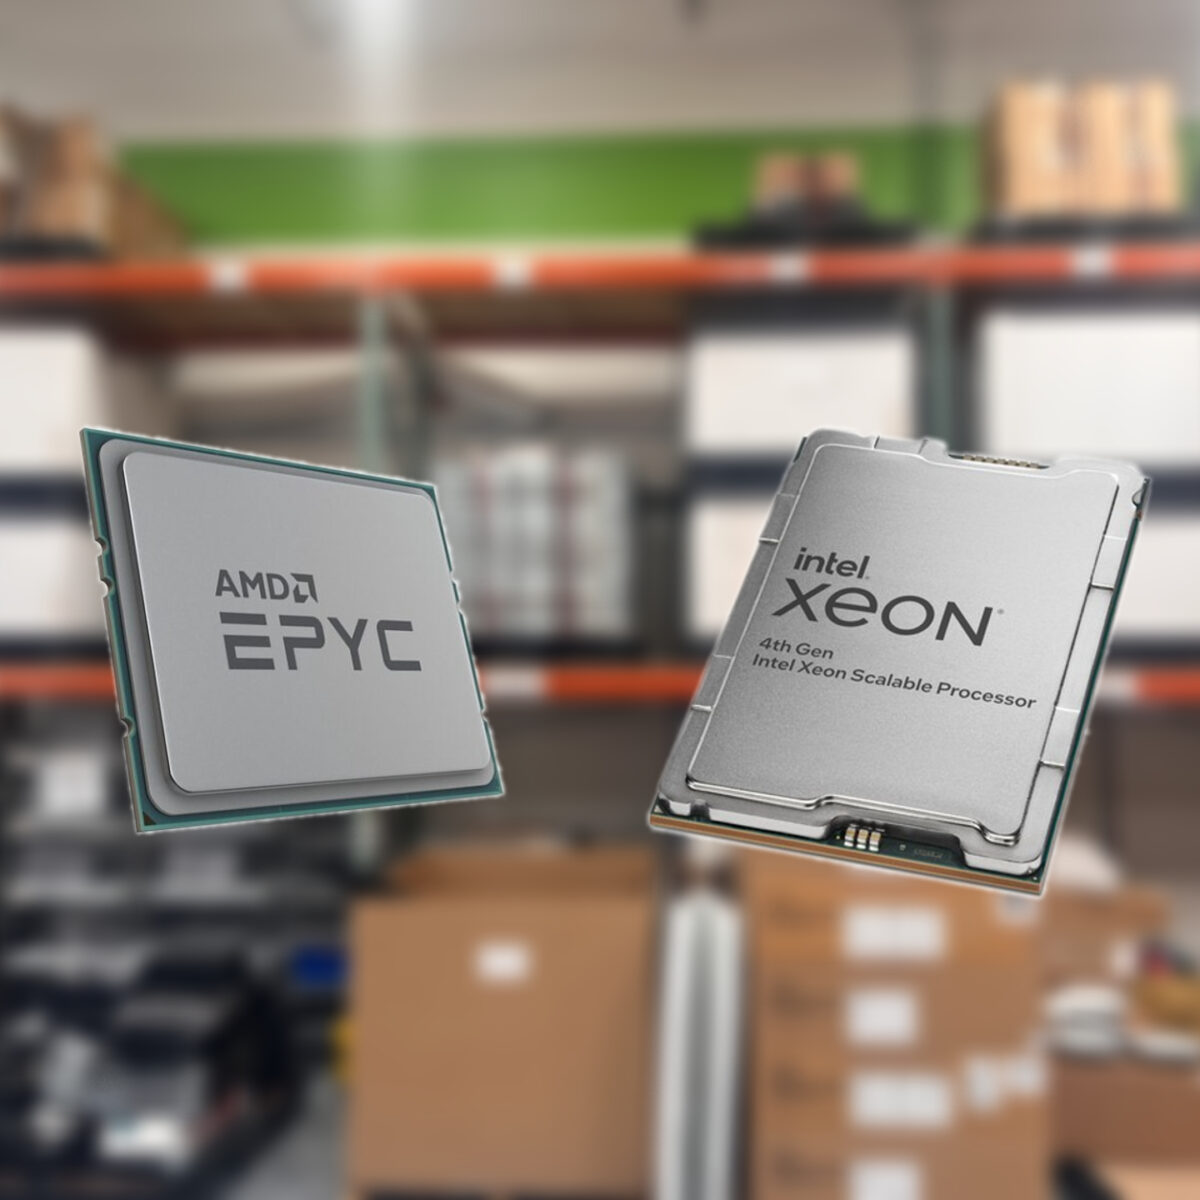 Xeon vs. Epyc: Which Processor Offers the Best Price-Performance Ratio?